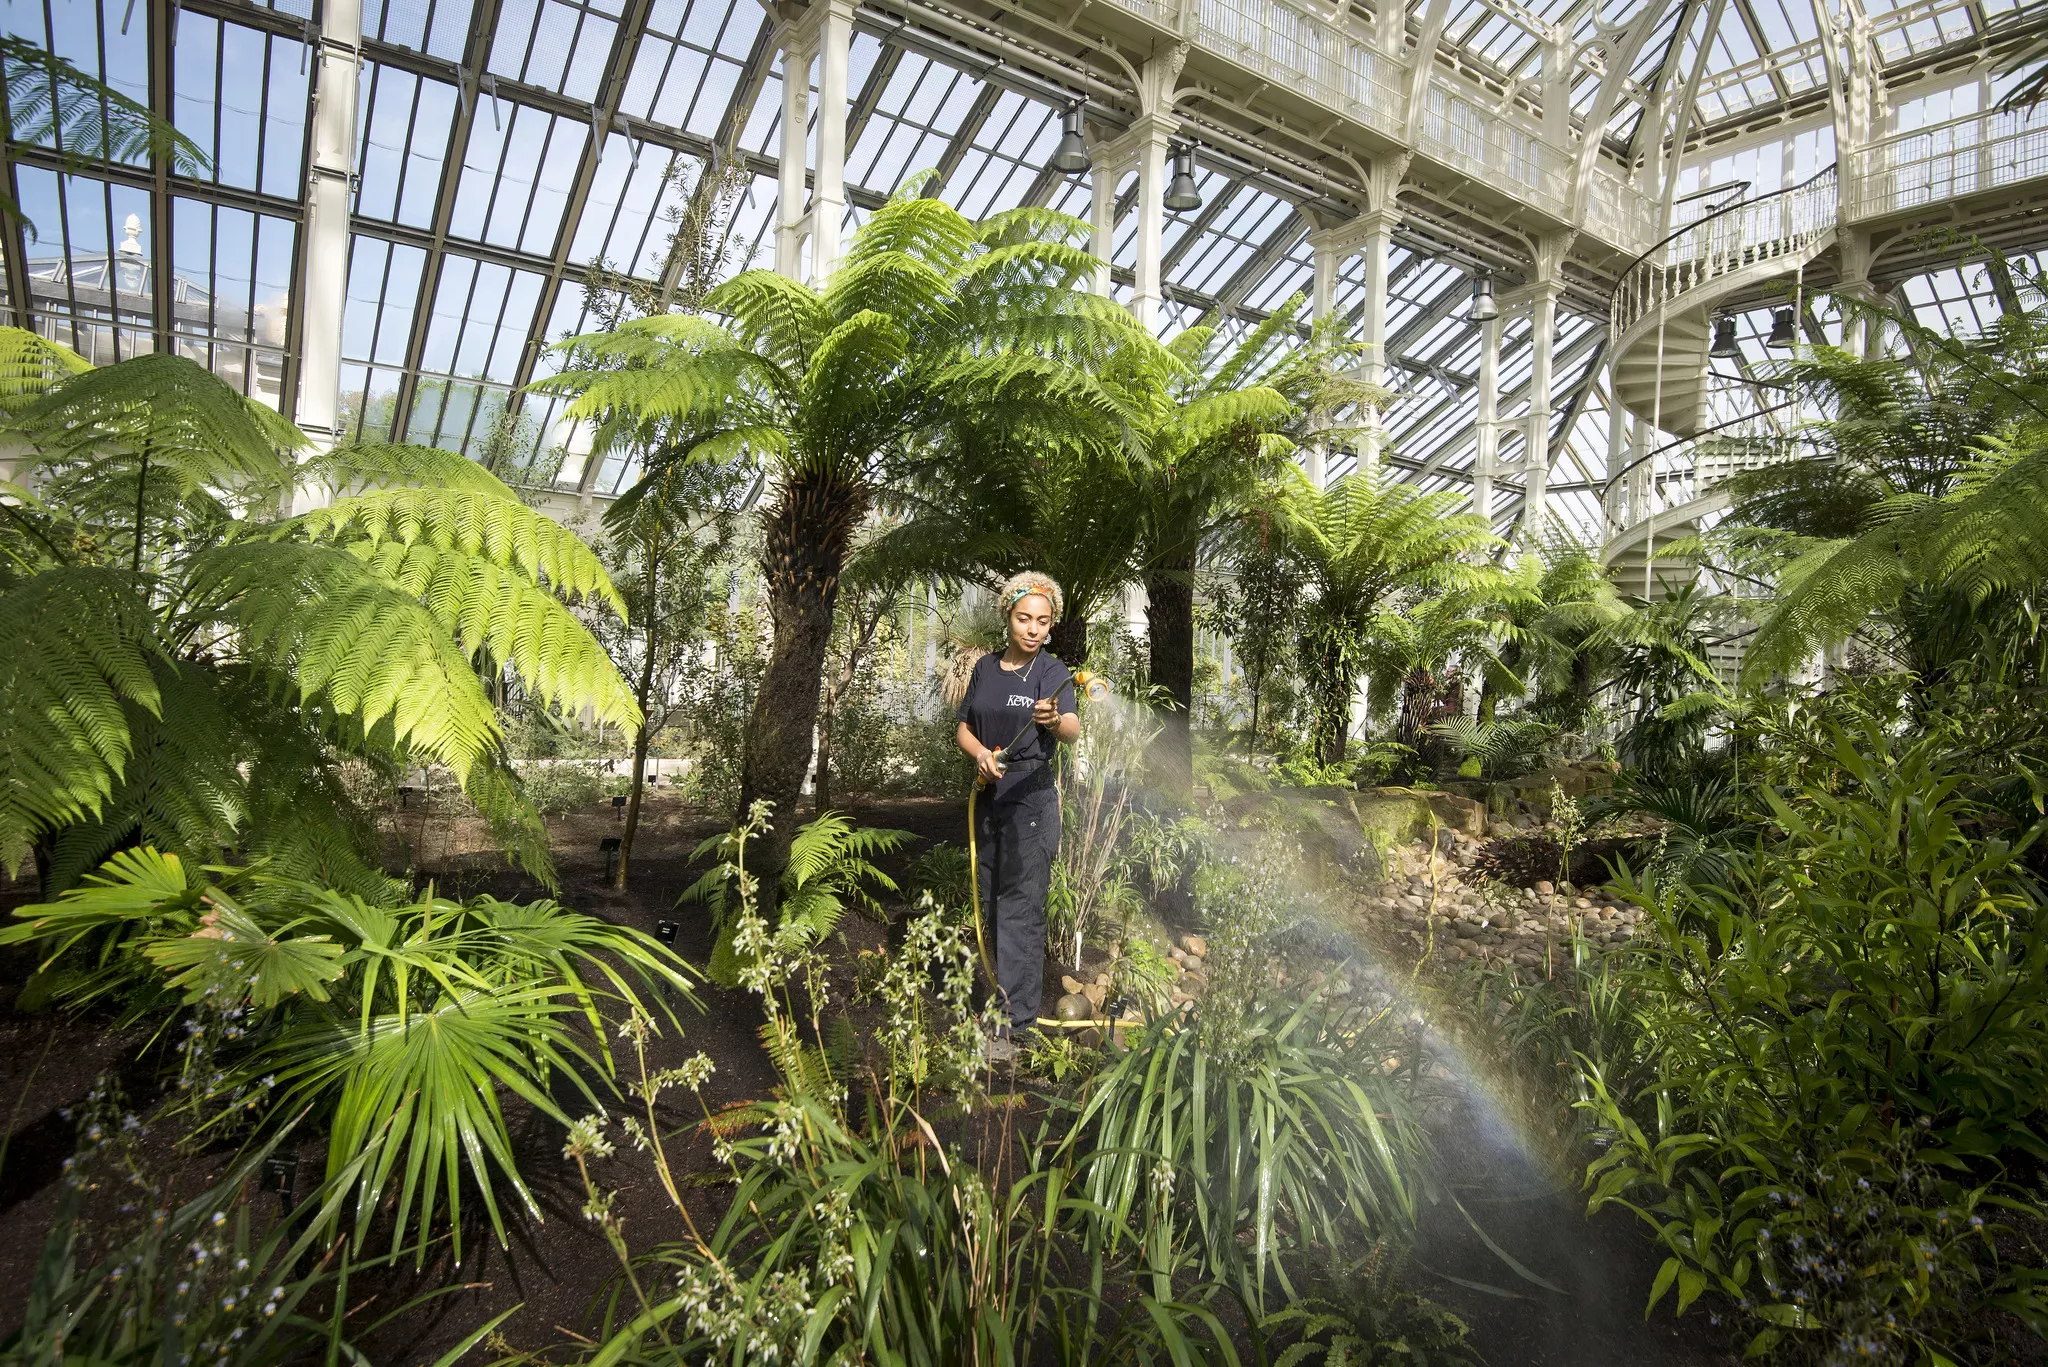 A member of the horticulture team watering plants in the Temperate House © RBG Kew/Jeff Eden